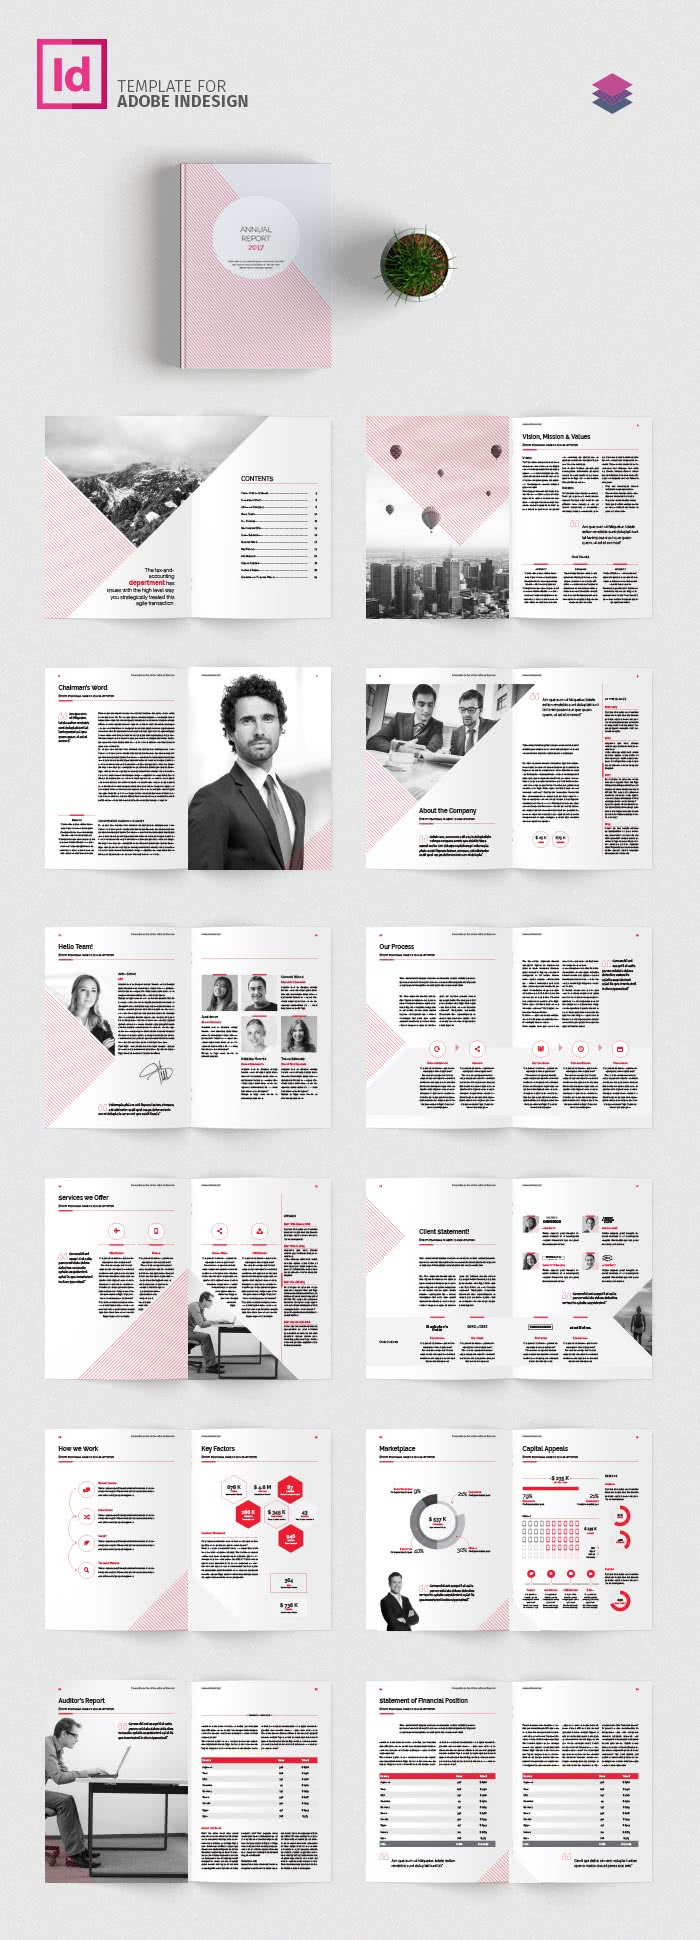 75 Fresh Indesign Templates And Where To Find More For Adobe Indesign Brochure Templates